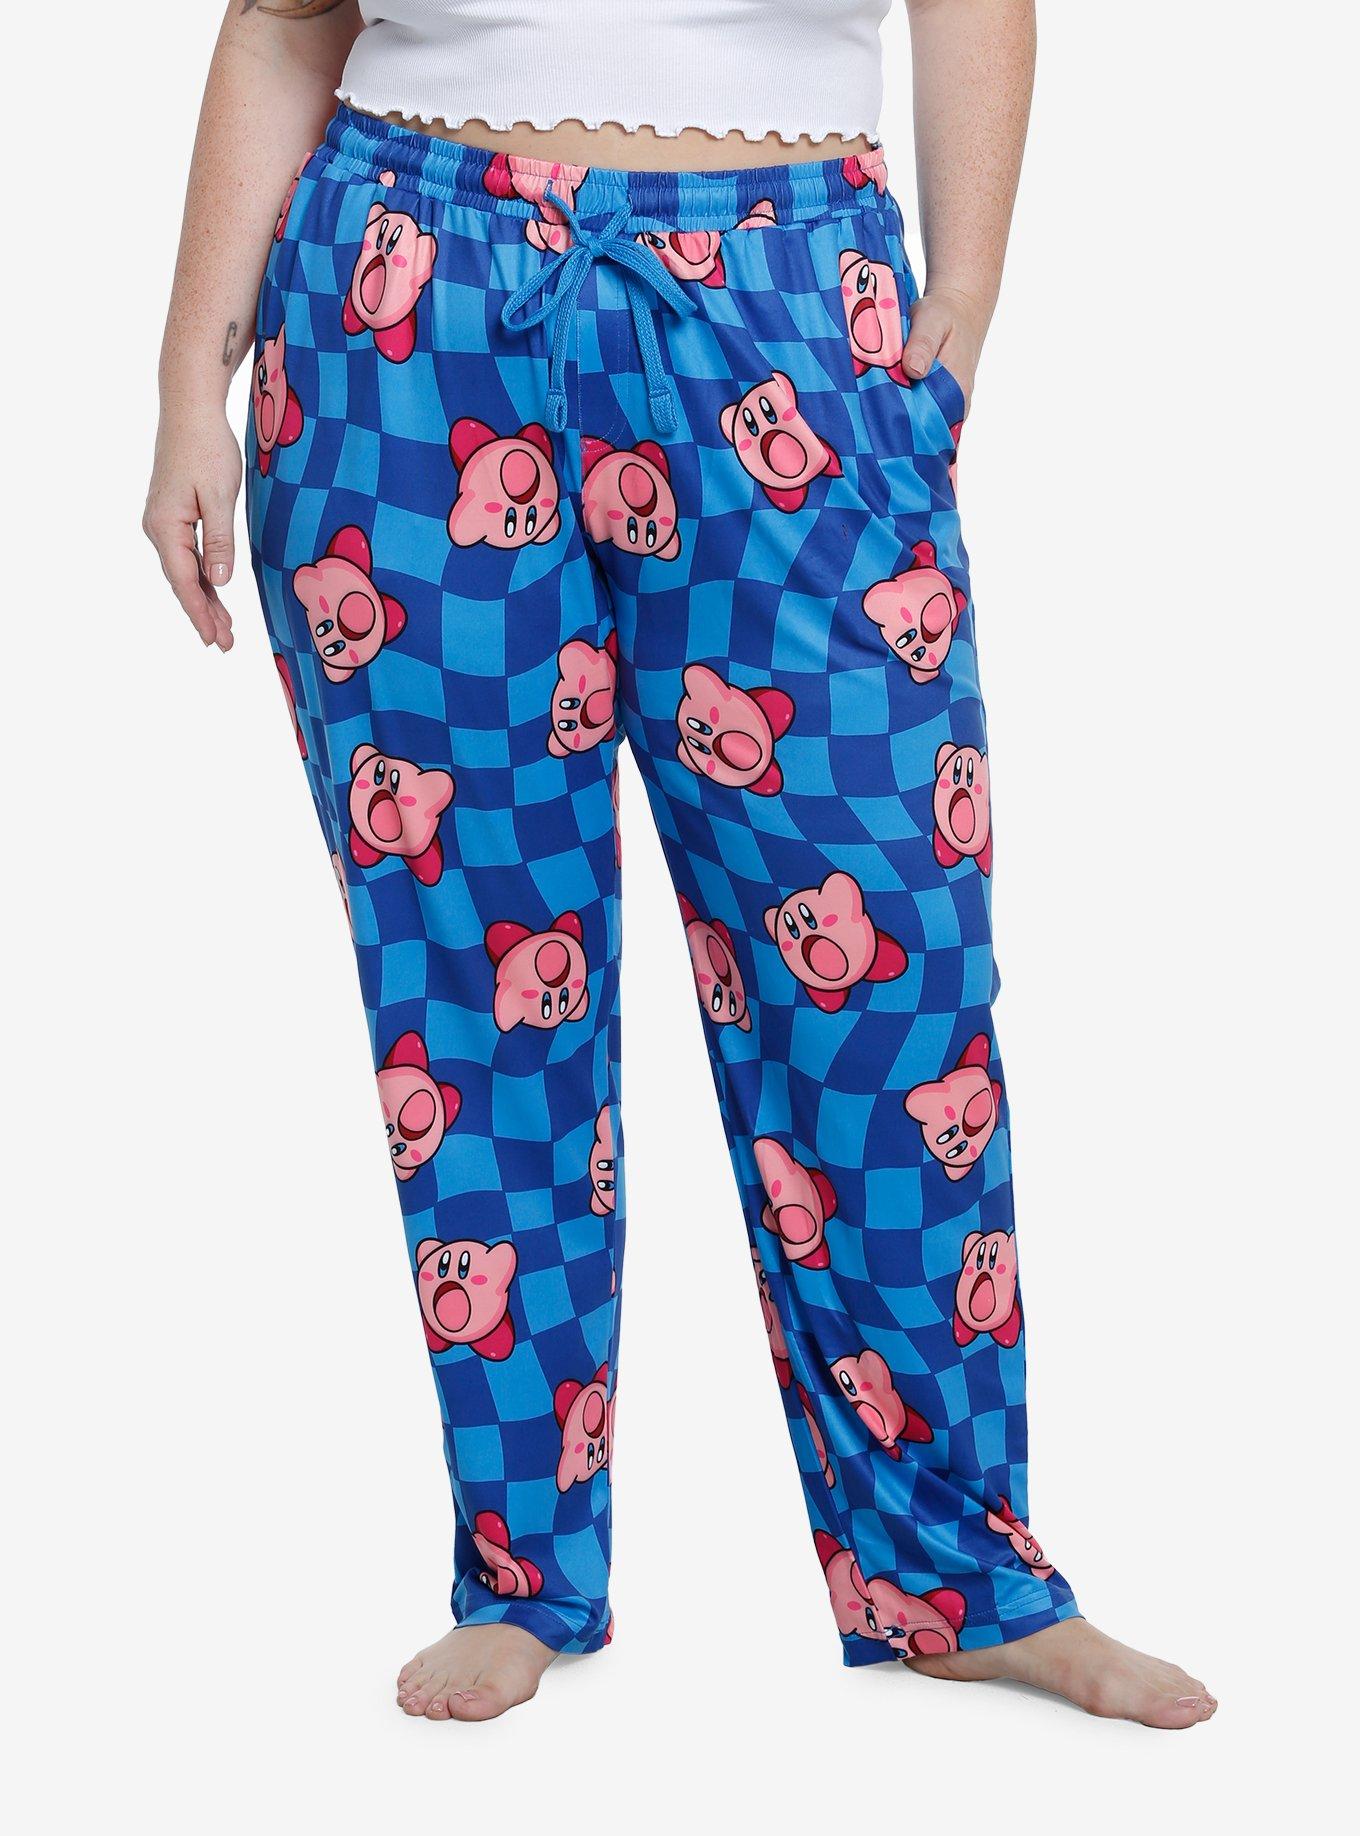 Yummy Mart Rolls Out Kirby Themed Pajamas and Undies